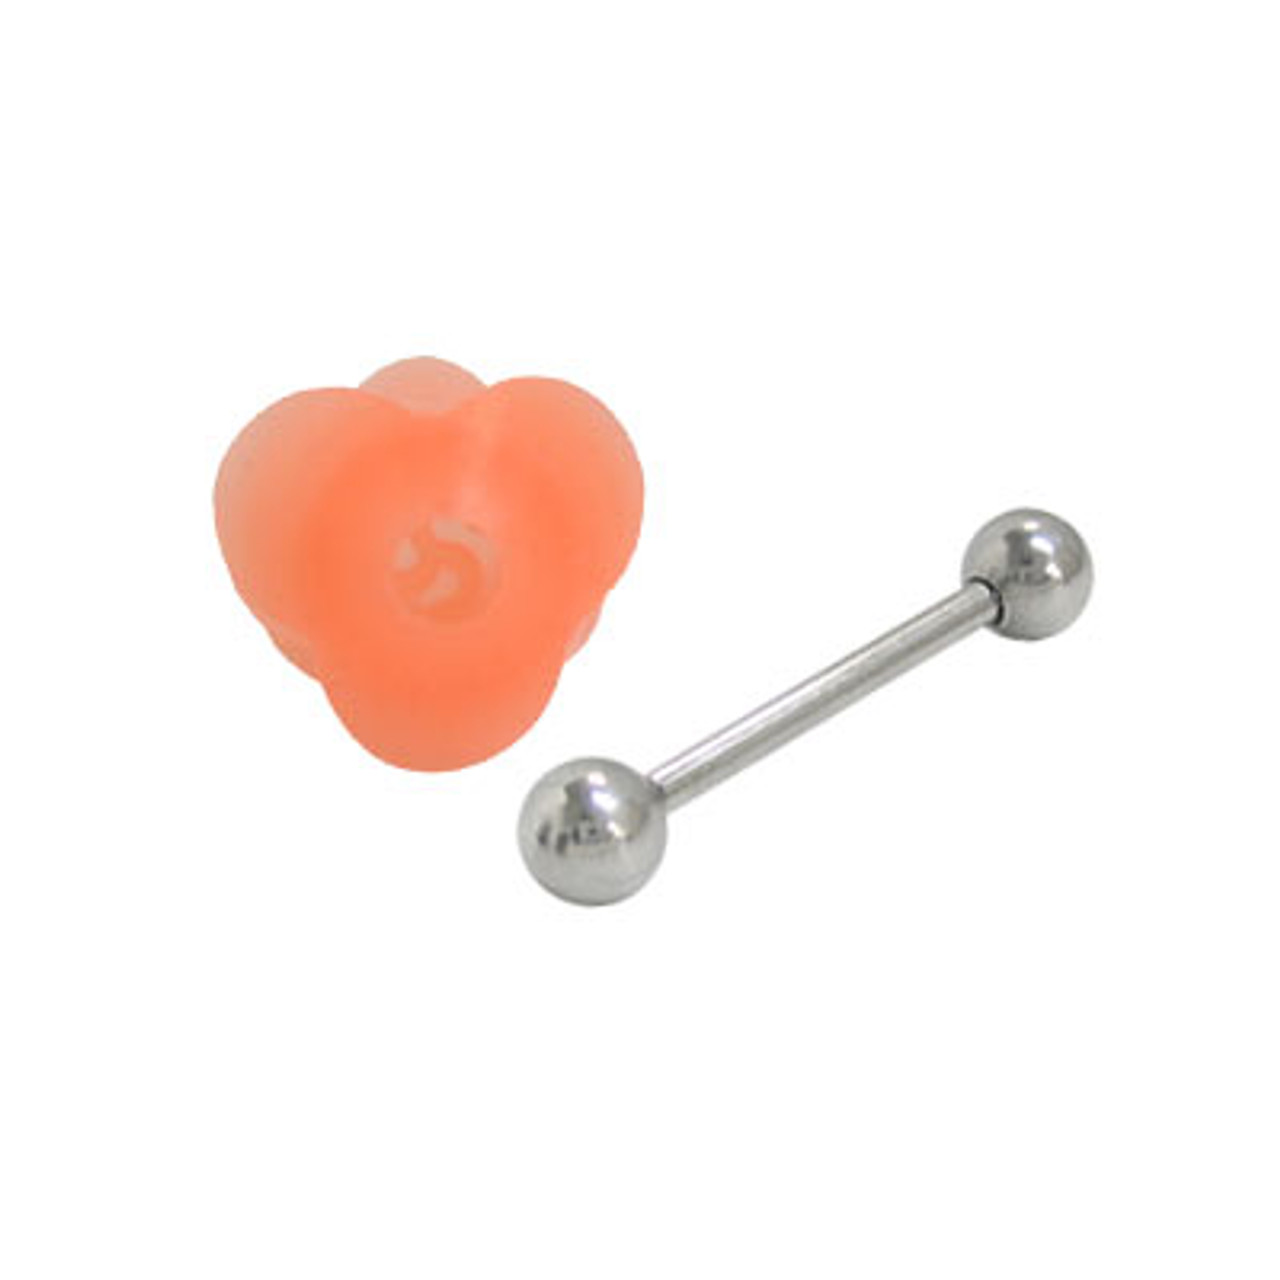 alexander gregory recommends French Tickler Tongue Rings